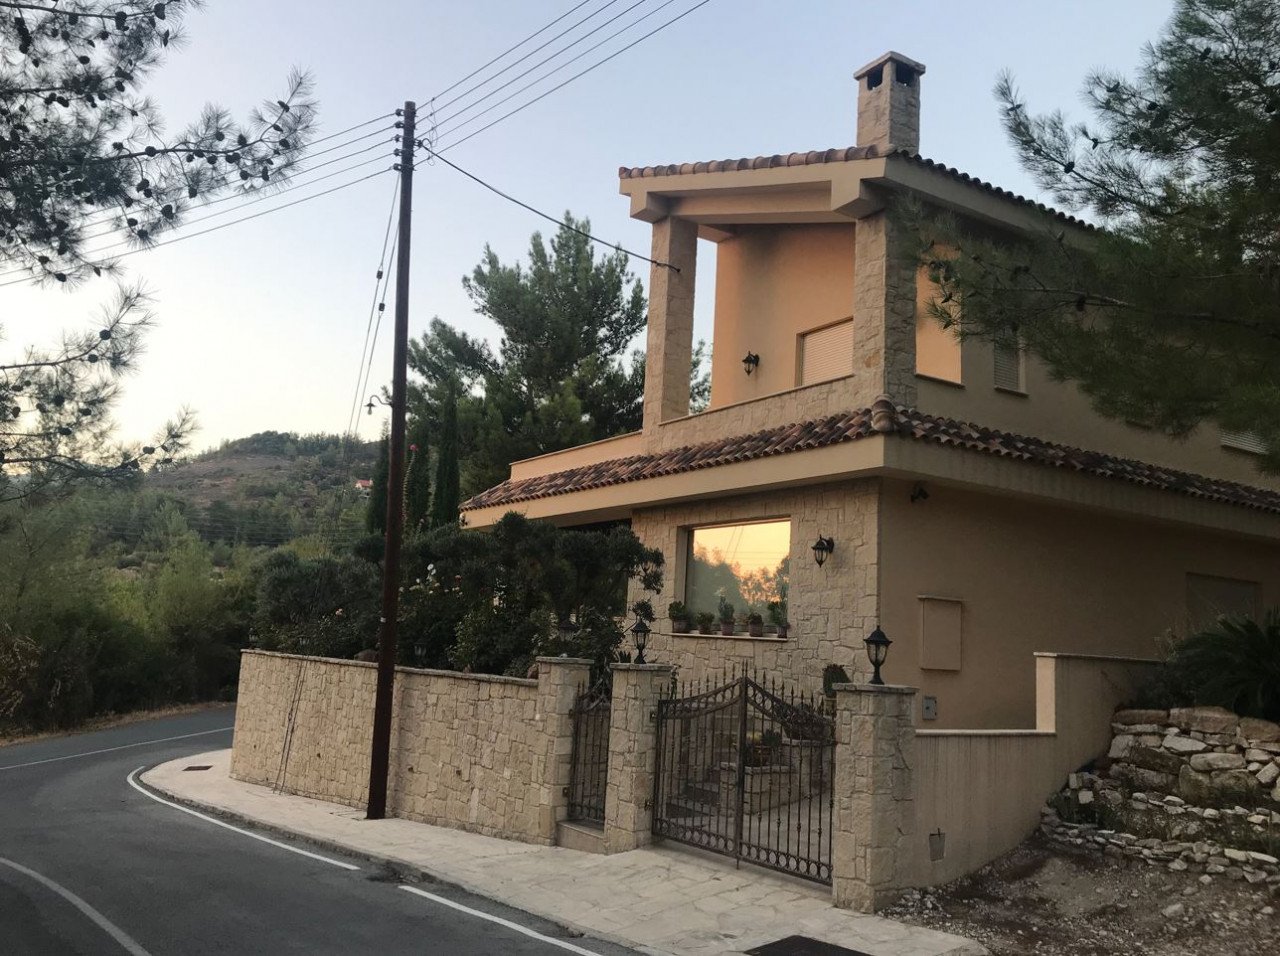 Property for Rent: House (Detached) in Pera Pedi, Limassol for Rent | Key Realtor Cyprus